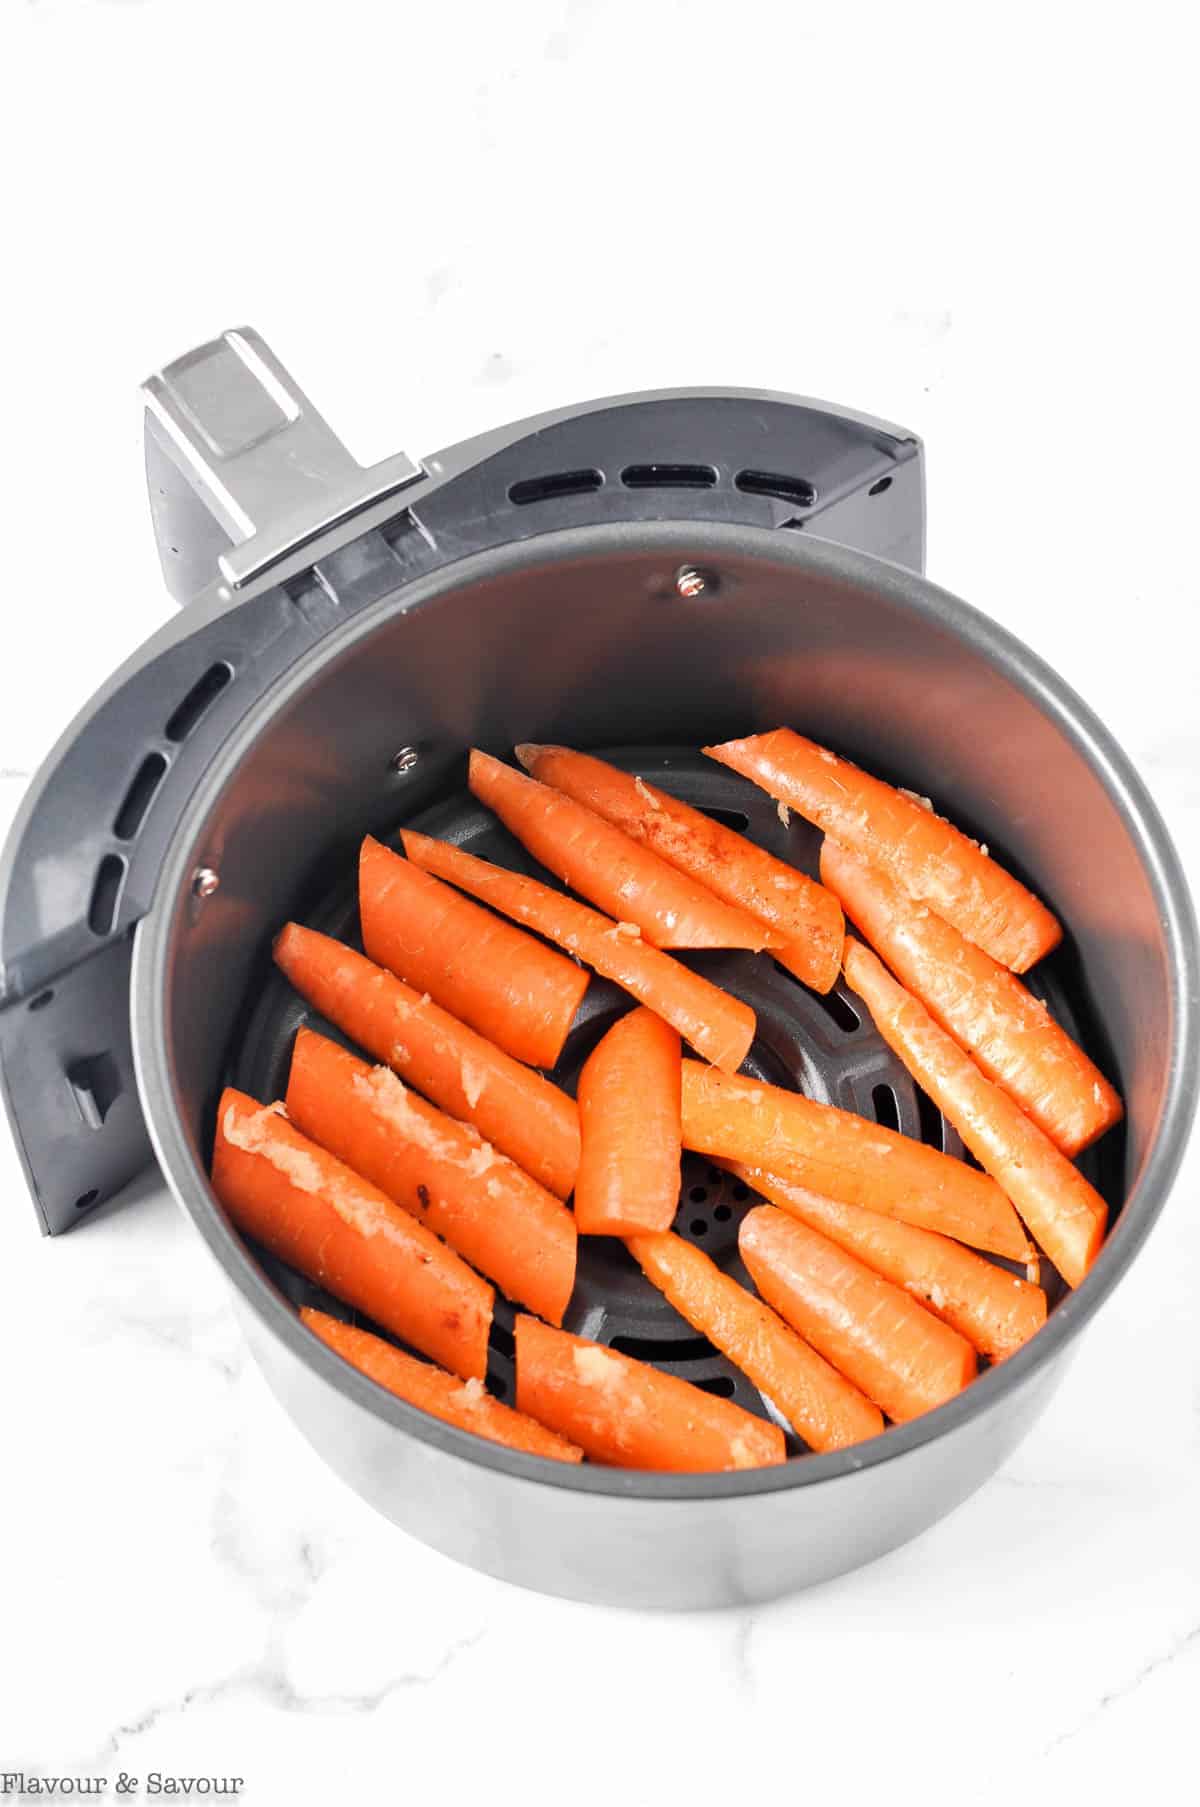 Carrots in air fryer basket, ready to fry.